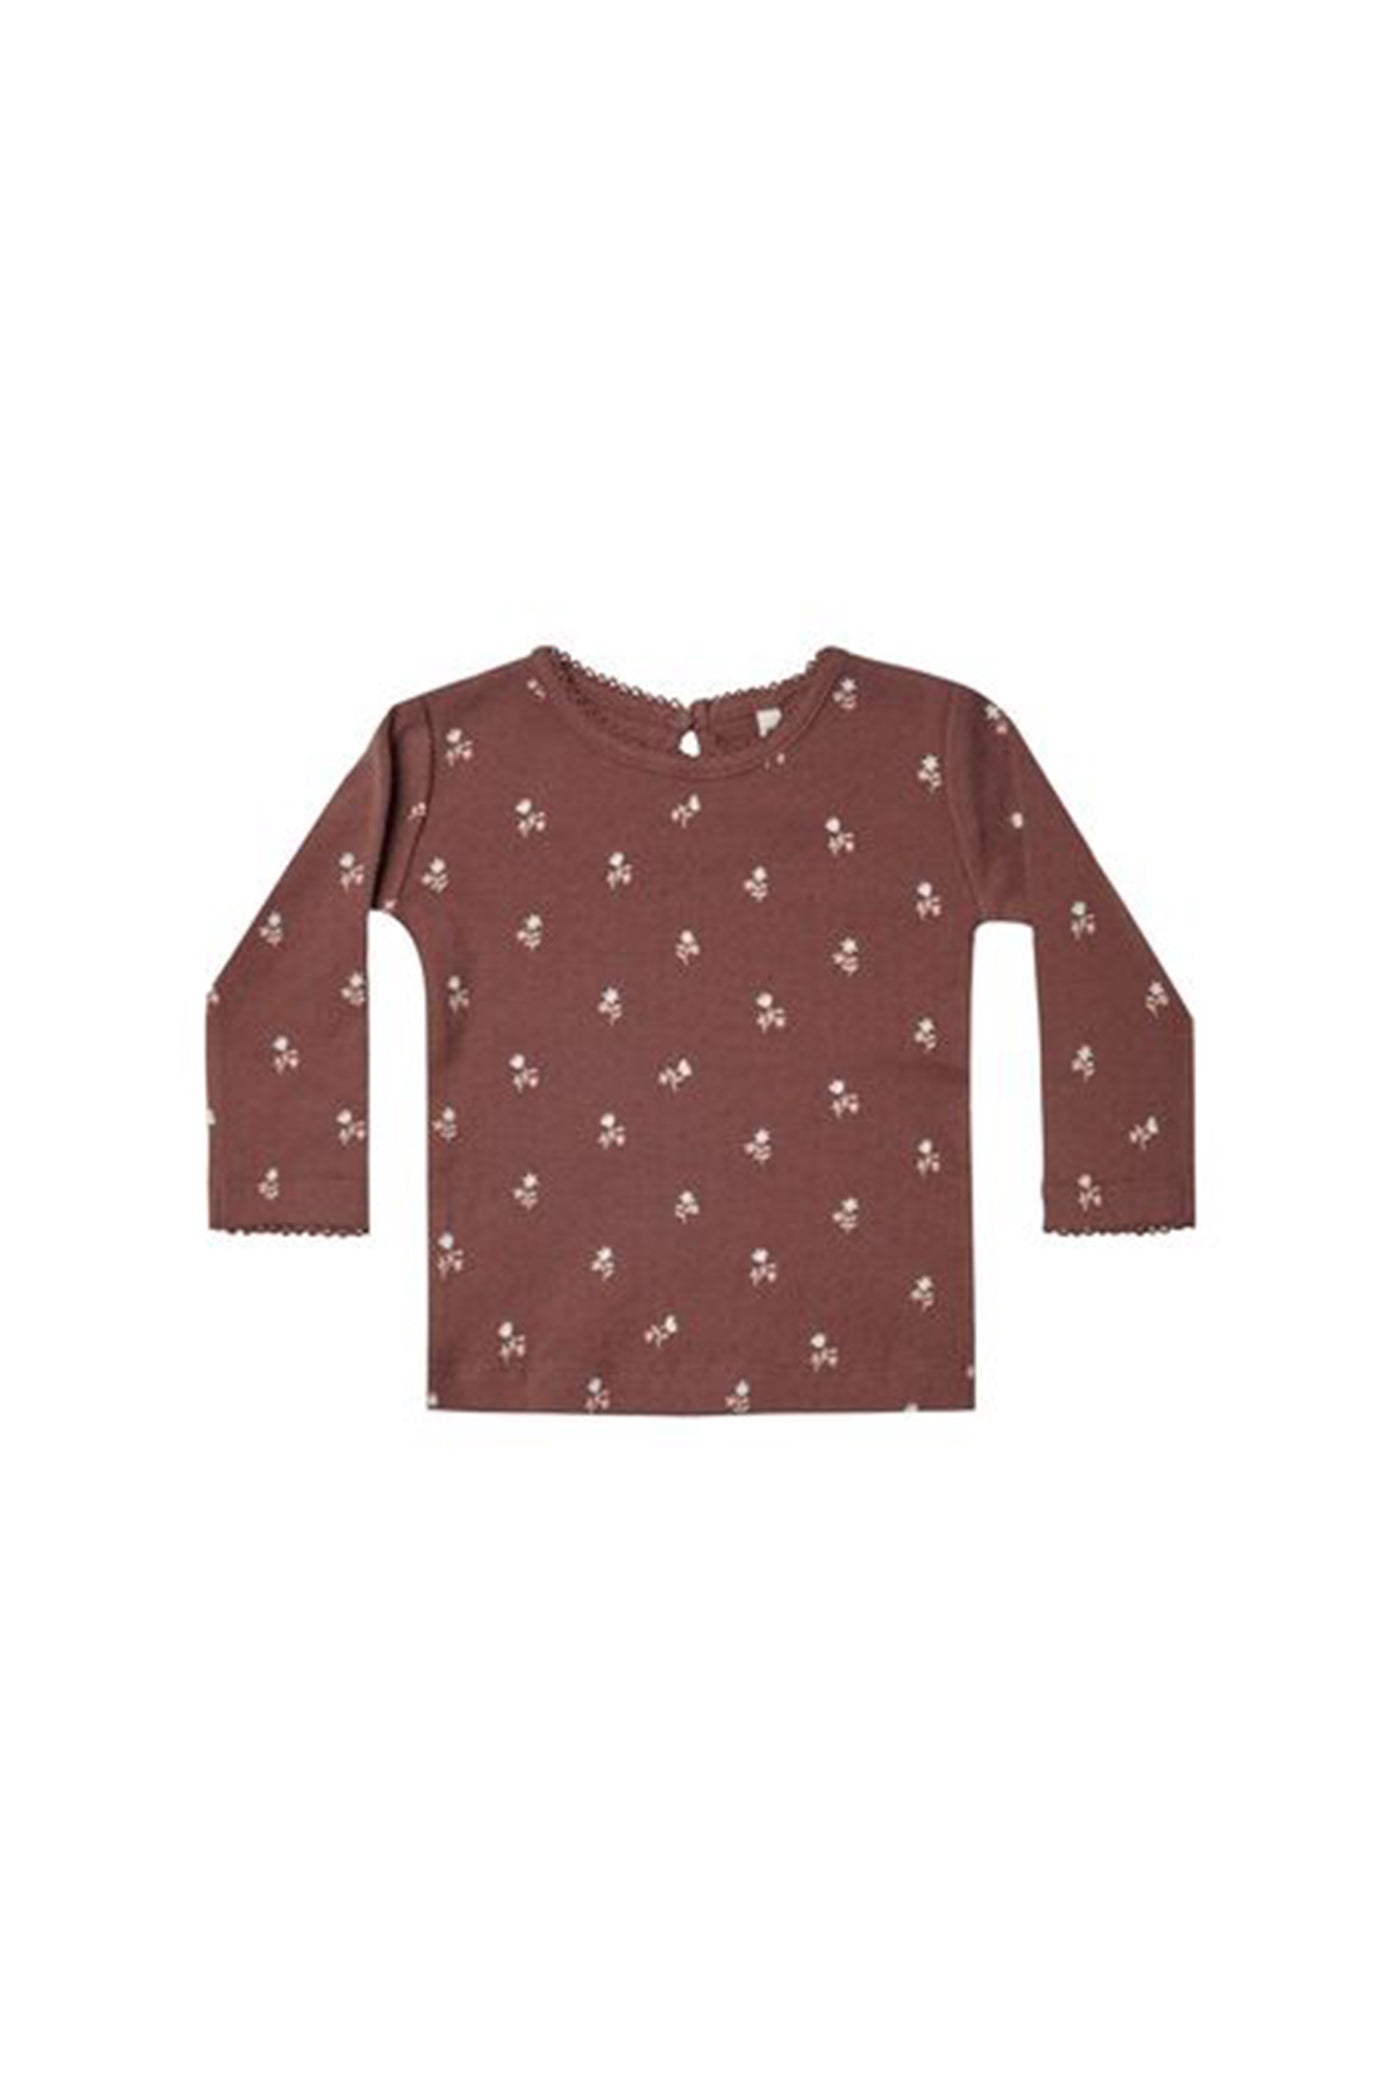 Pointelle Long Sleeve Kids Tee by Quincy Mae